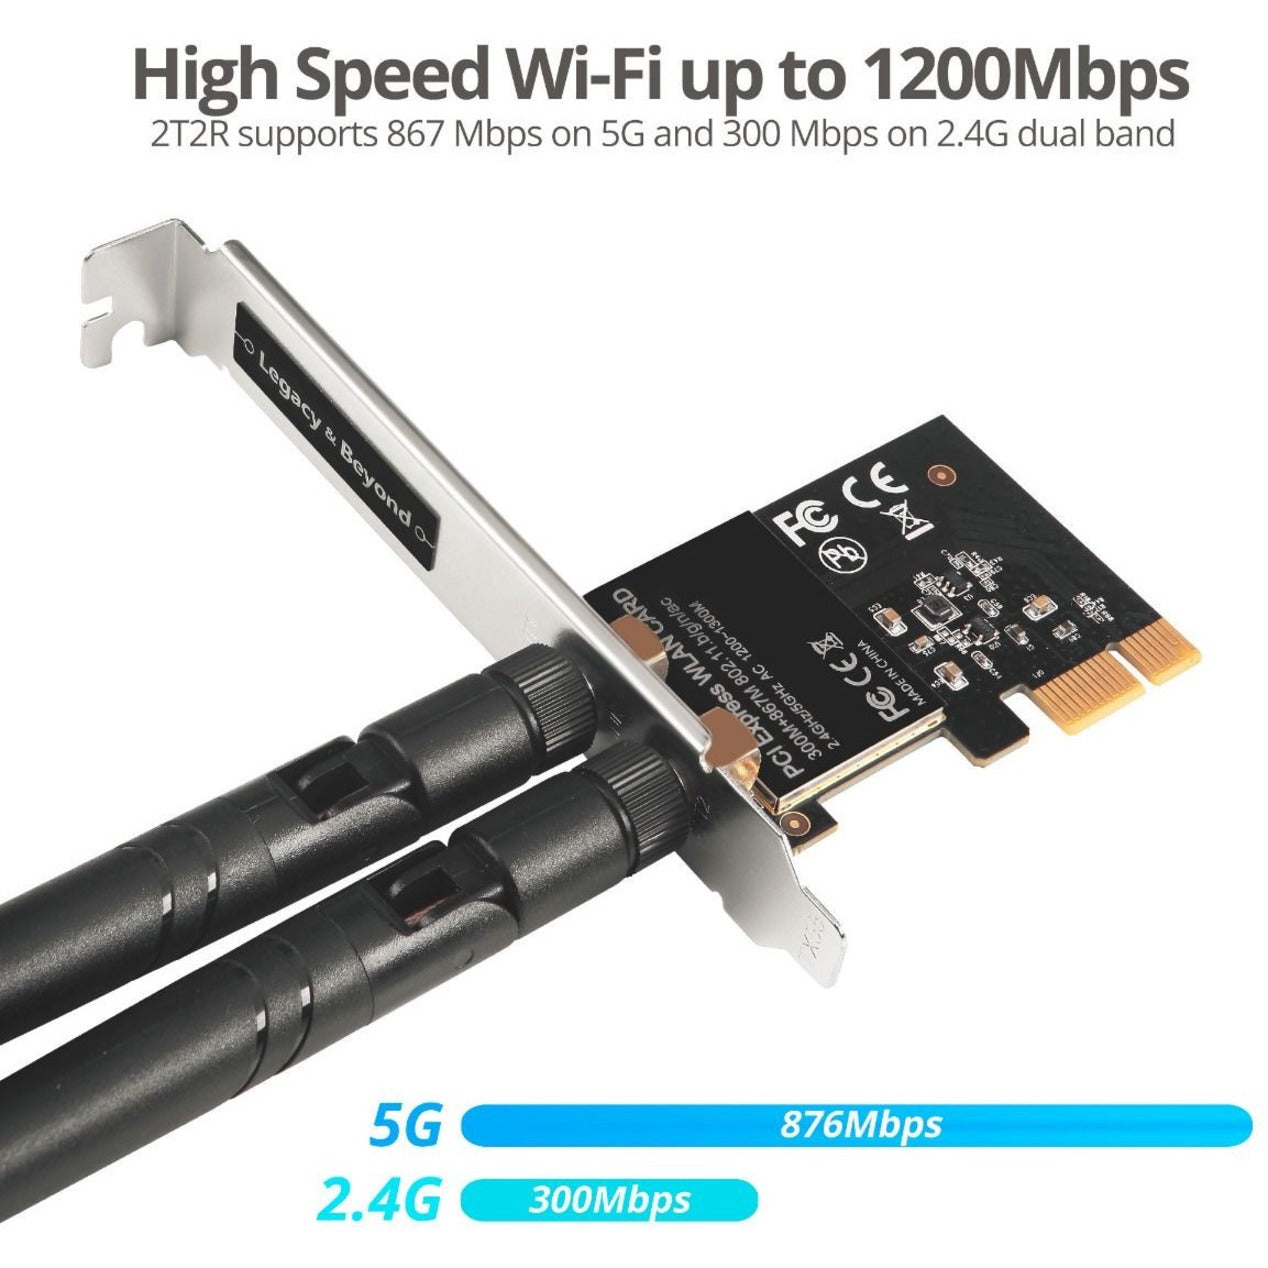 SIIG LB-WR0011-S1 Wireless 2T2R Dual Band WiFi Ethernet PCIe Card - AC1200, High-Speed Internet Connection for Desktop Computers and Servers